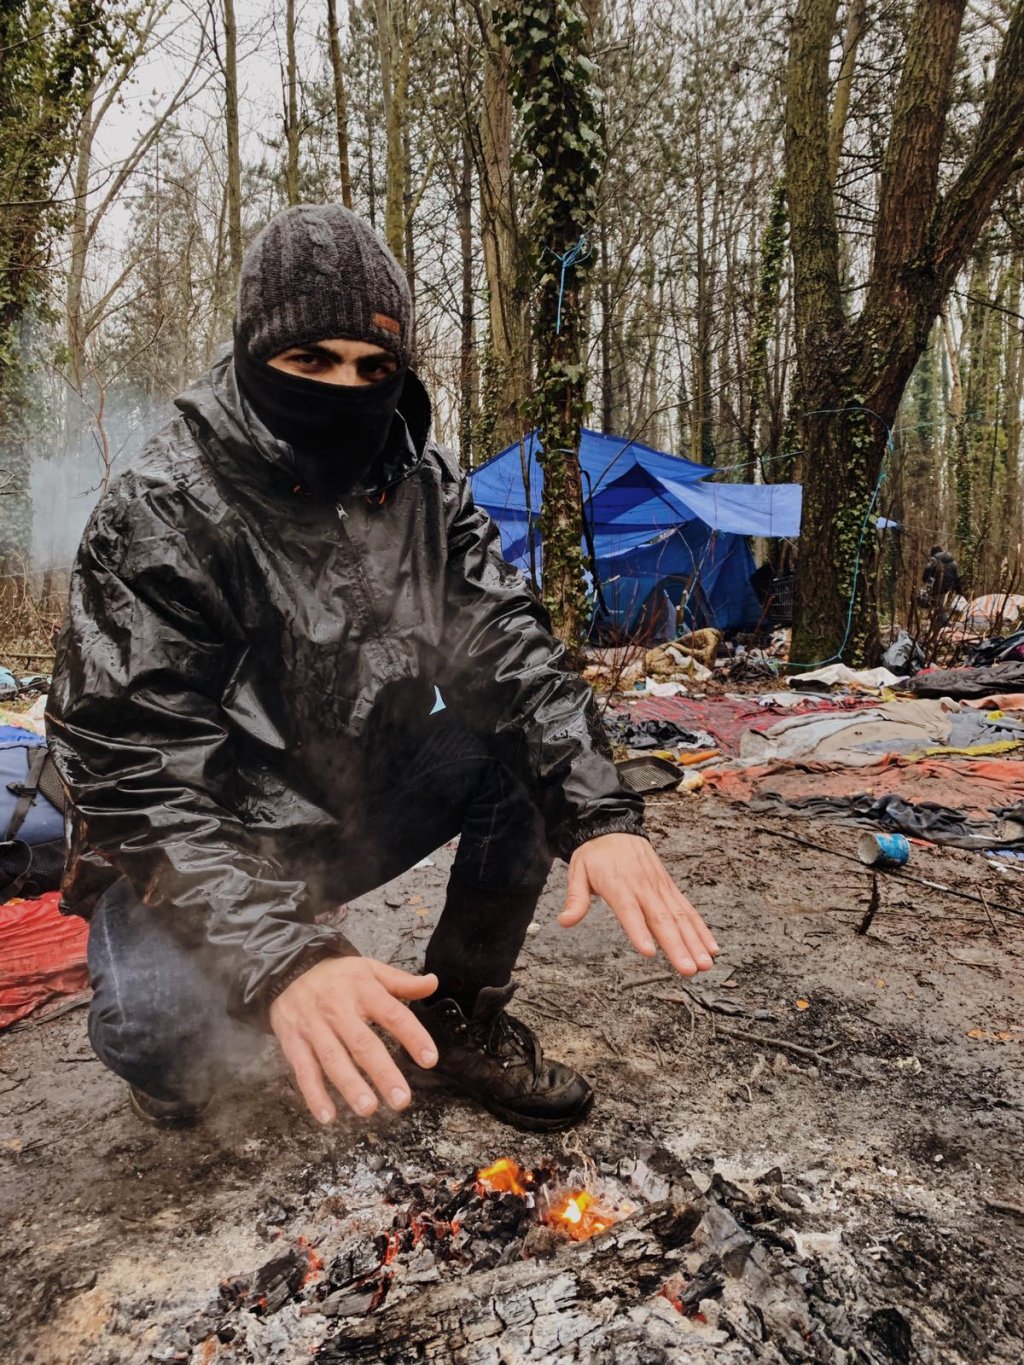 Hundreds of migrants live in and around Calais and Dunkirk, where temperatures have dropped in recent weeks | Photo copyright: Care4Calais, January 2021